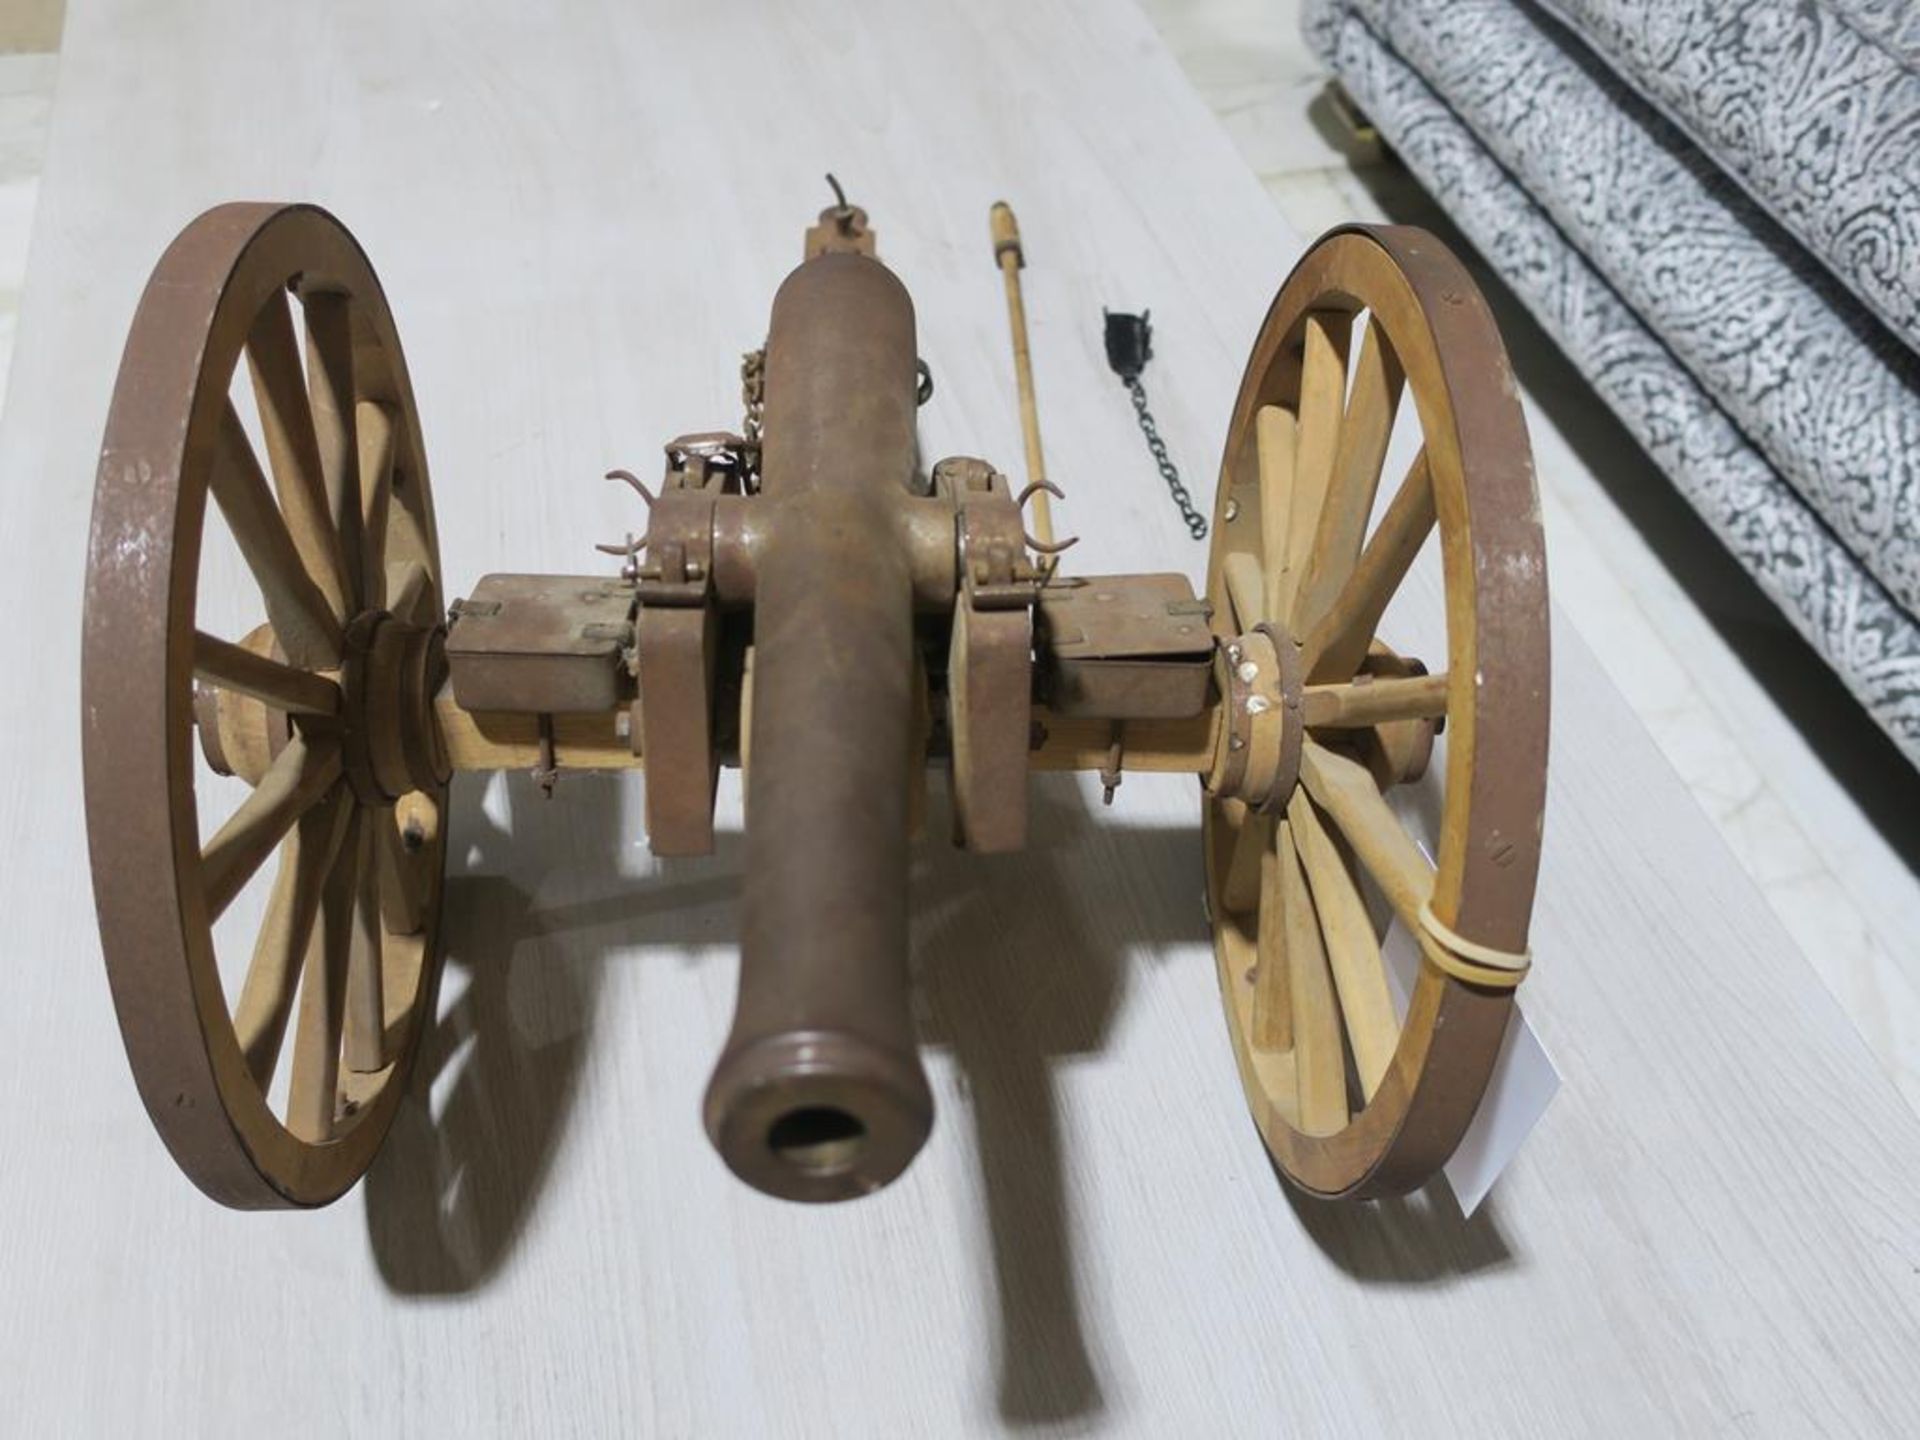 A Decorative Cannon with Metal Barrel, Fittings and Tyres (RRP £350) - Image 2 of 4